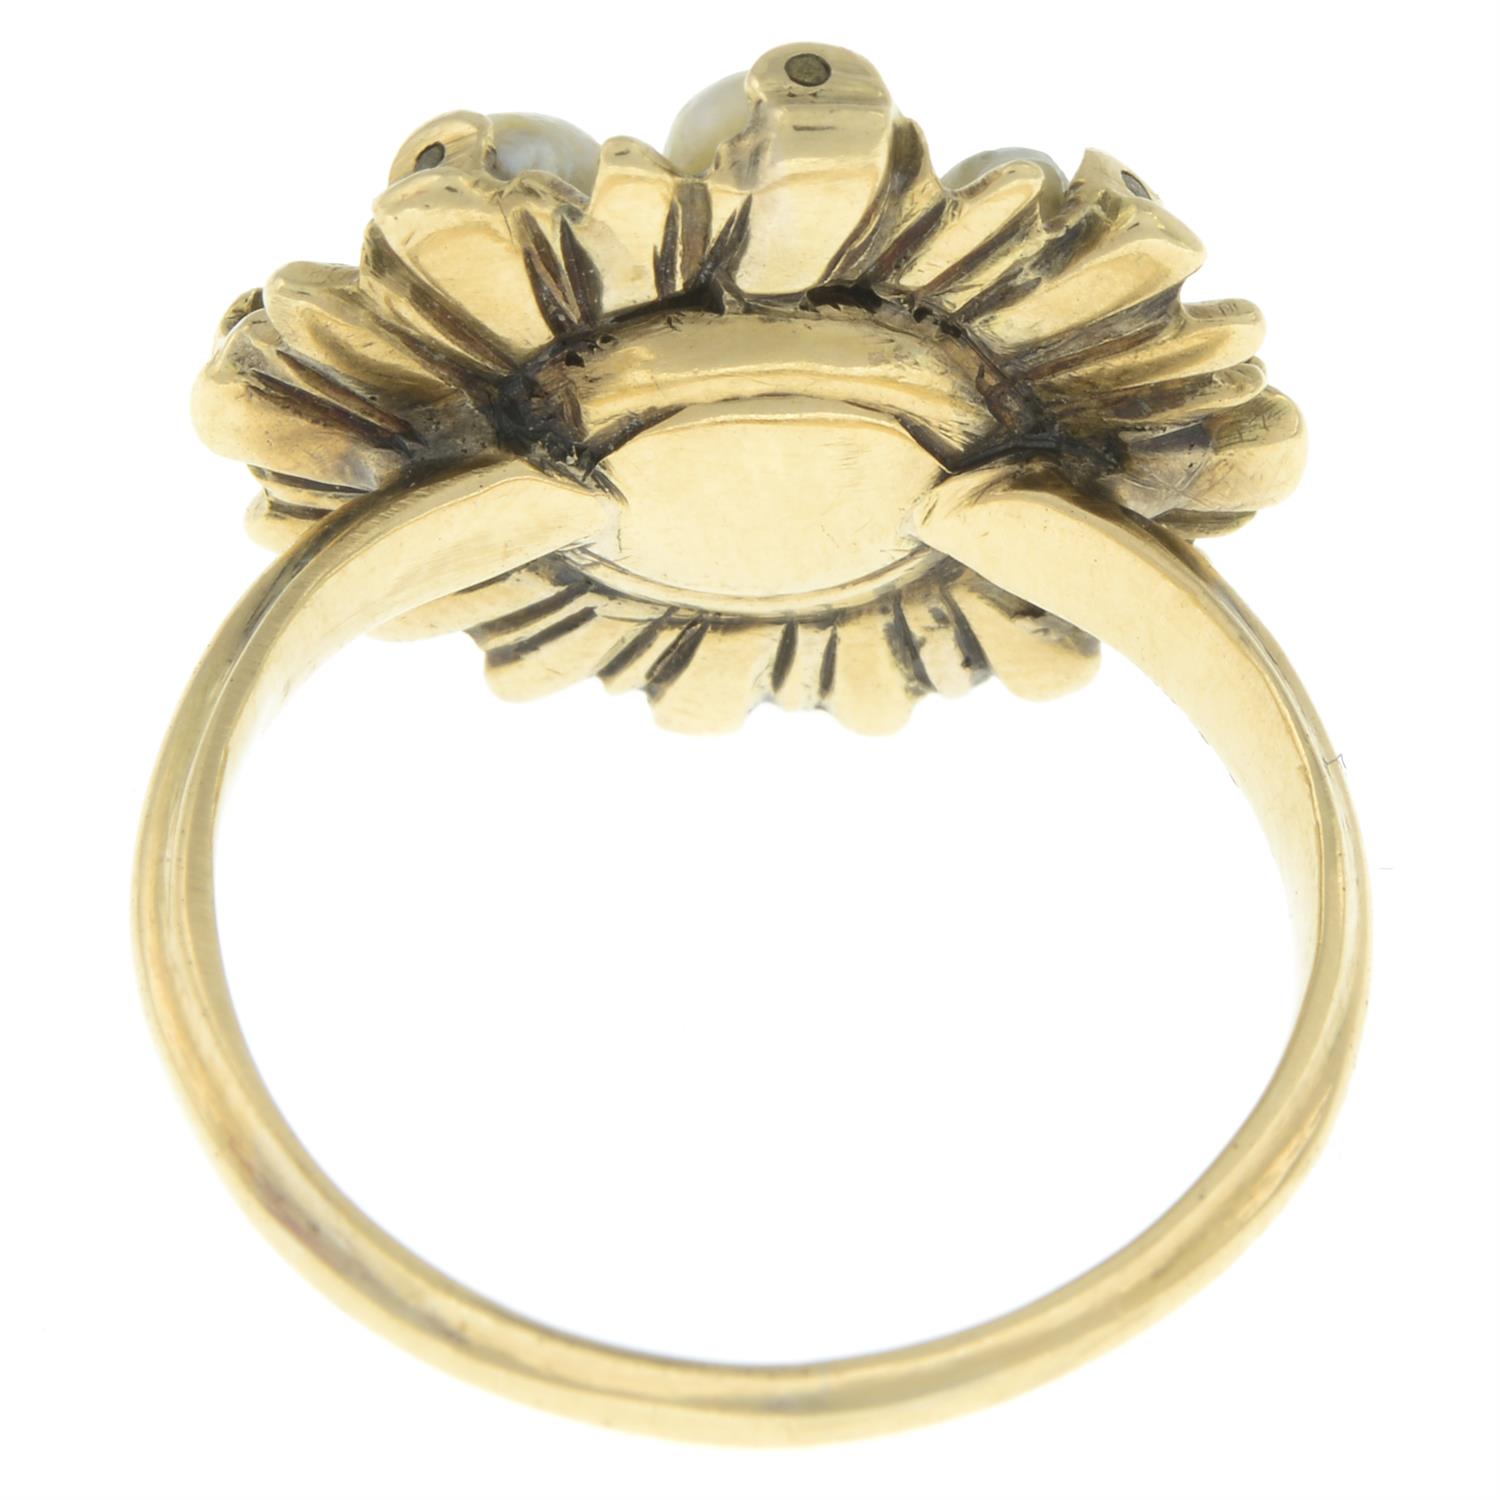 17th century gold seed pearl ring - Image 3 of 5